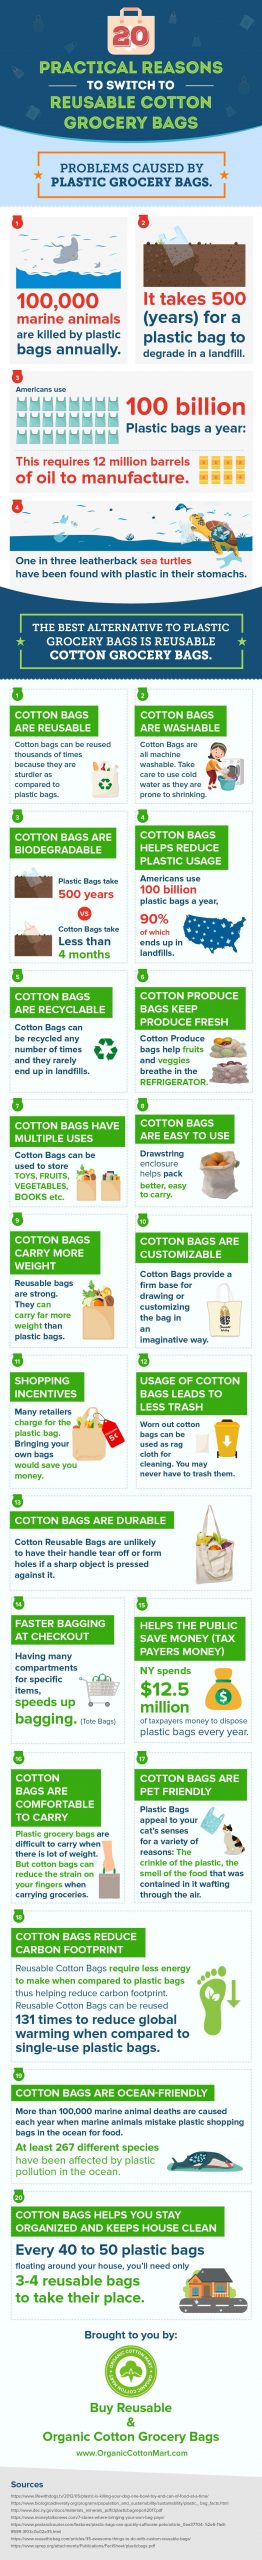 Reasons To Replace Plastic Bags With Cotton Reusable Bags